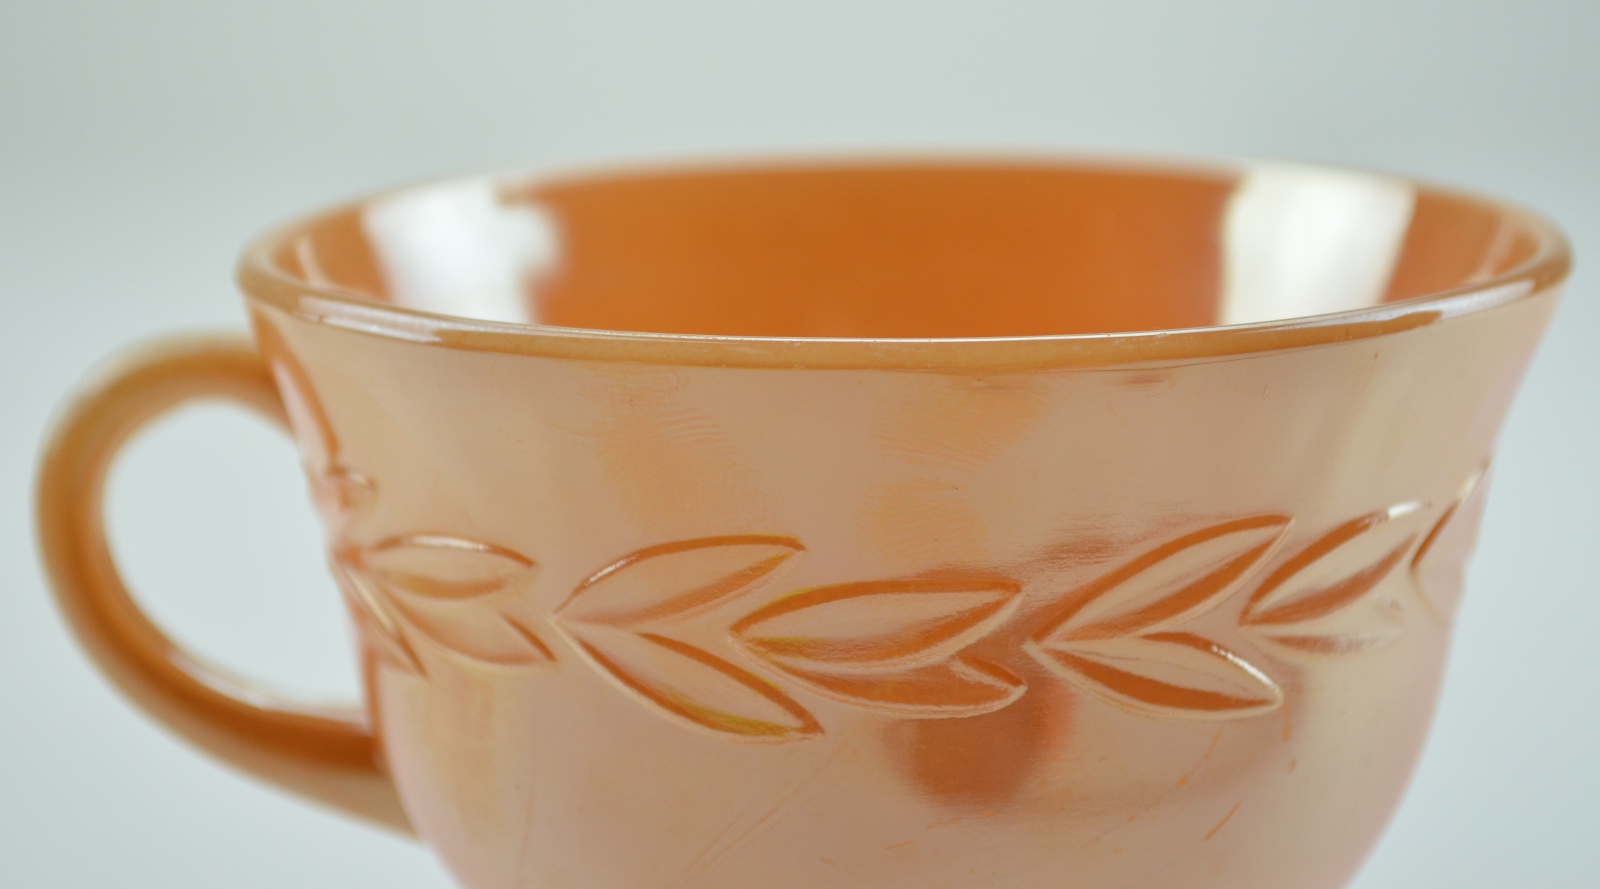 Fire King Peach Lustre Oven Ware Three Bands Coffee Tea Cup 8 oz. 